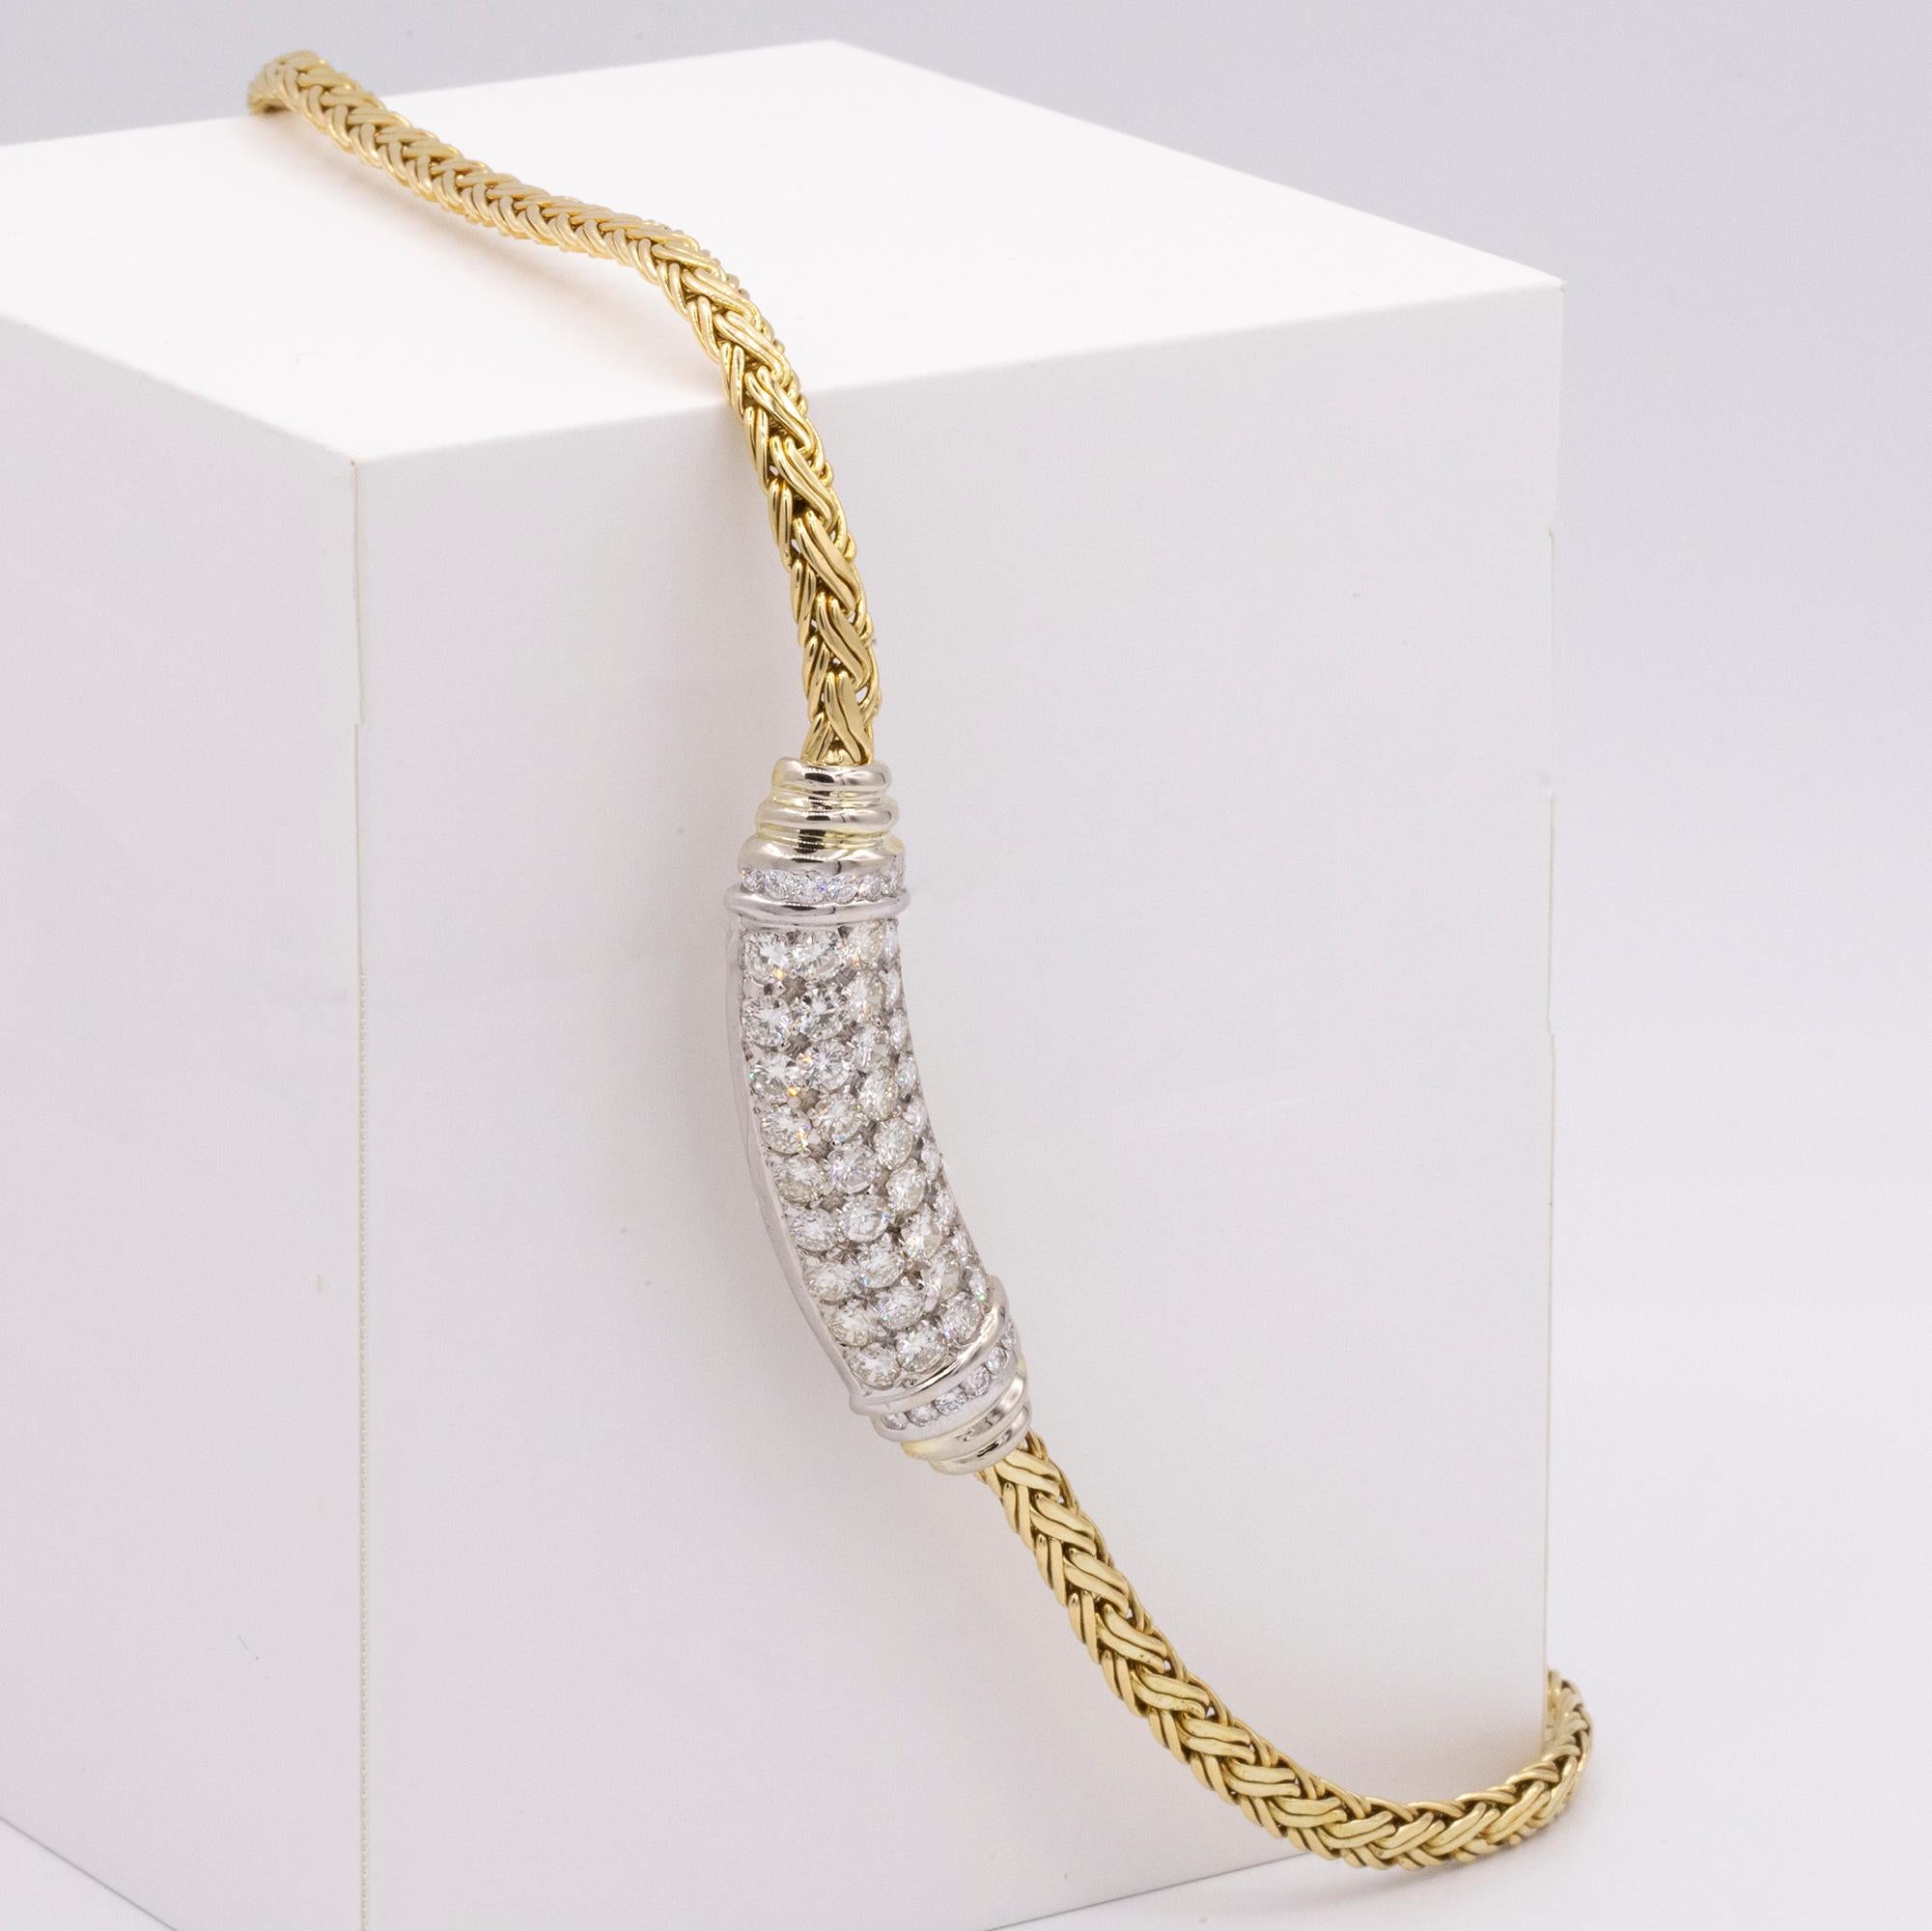 18kt White & Yellow Gold Pave Station Necklace with 50 multiple sized Round Diamonds with Color ranging from G-H & Clarity ranging from VS-SI. The necklace measures 16